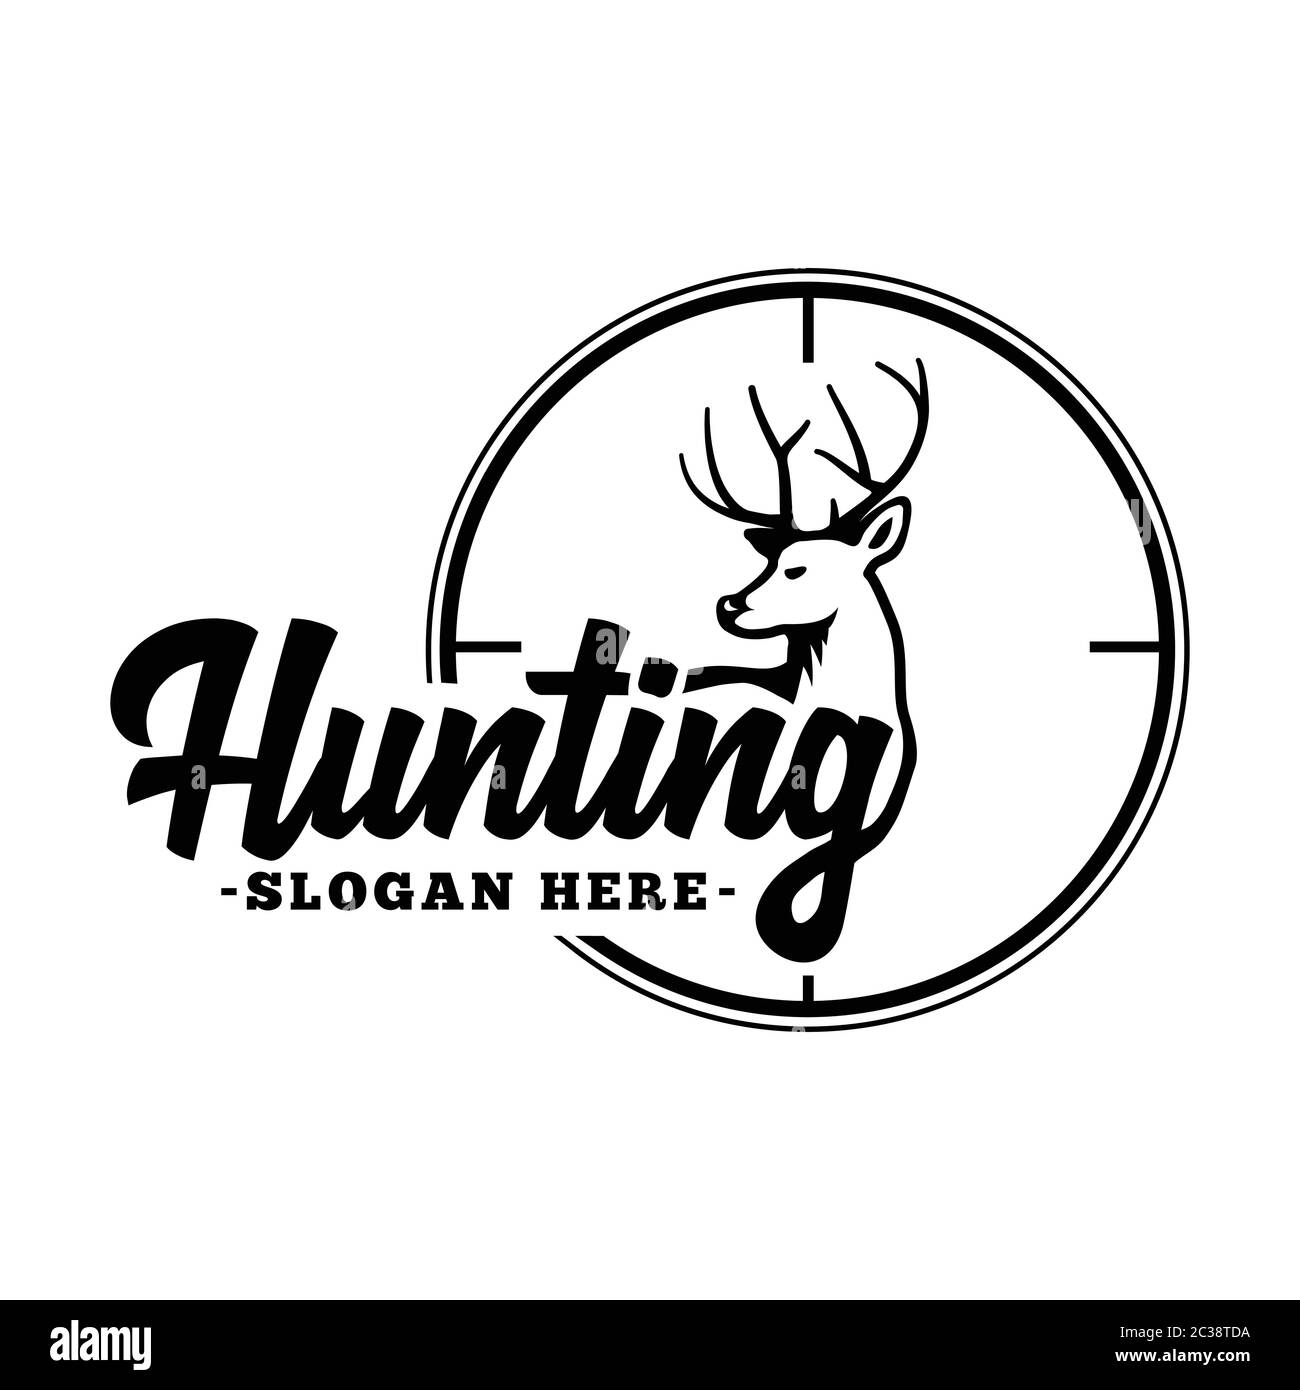 Hunting logo. Black and white lettering design. Decorative inscription. Hunting vector and illustration. Stock Vector